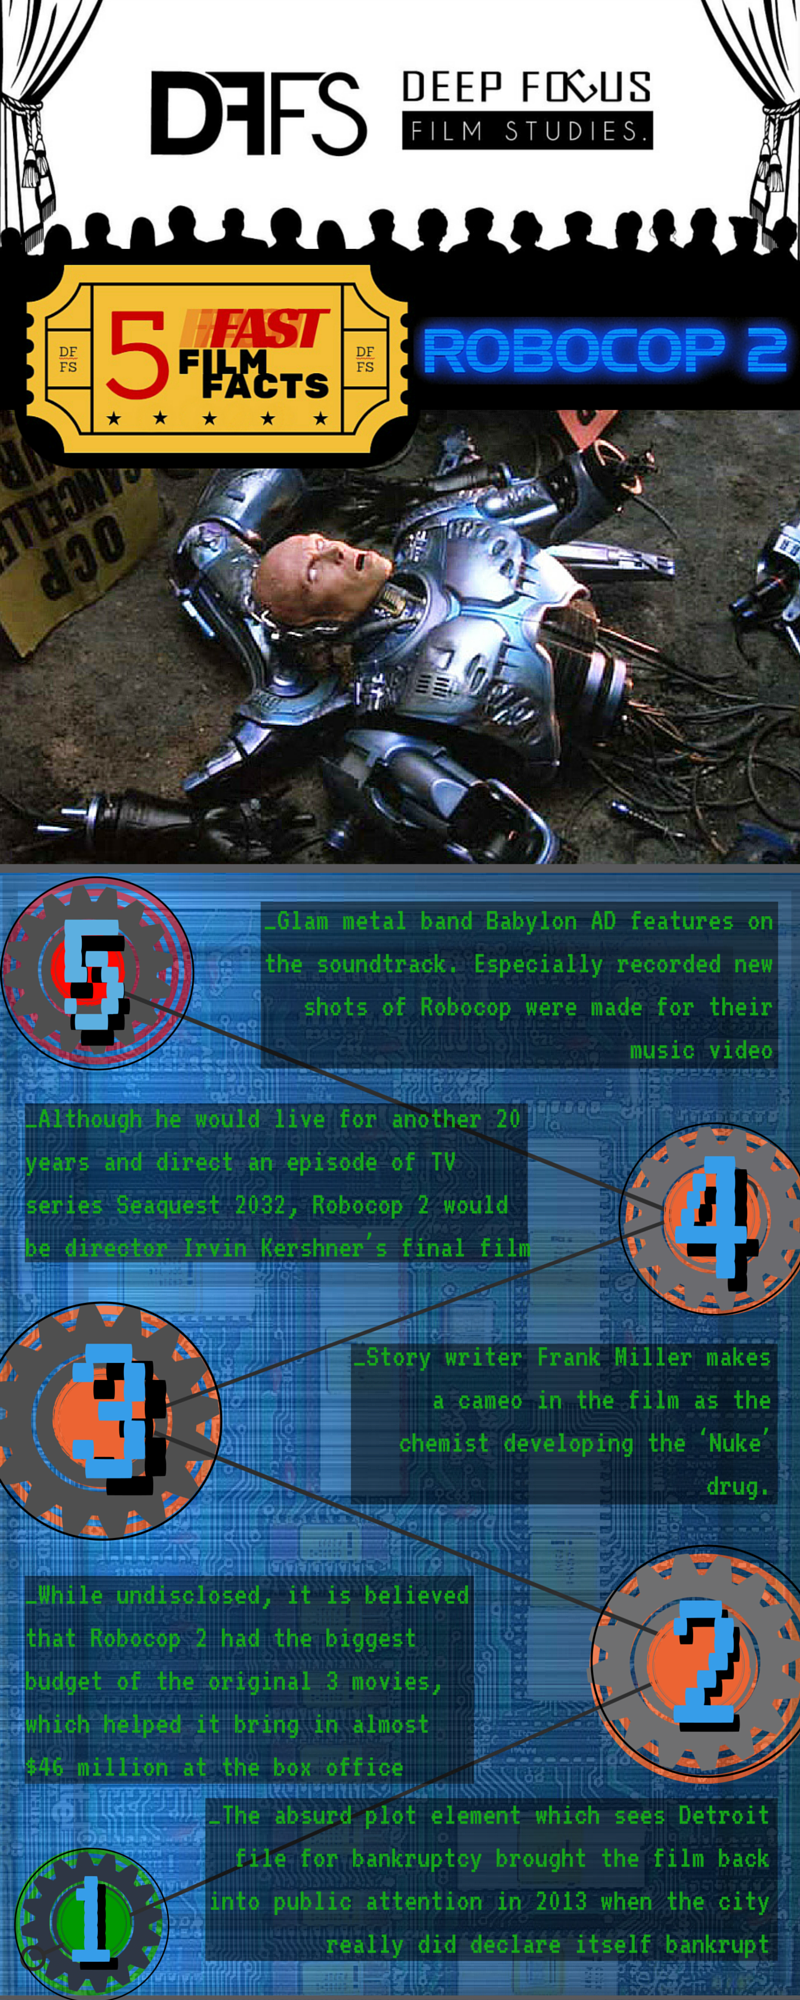 Infographic of trivia on the film Robocop 2